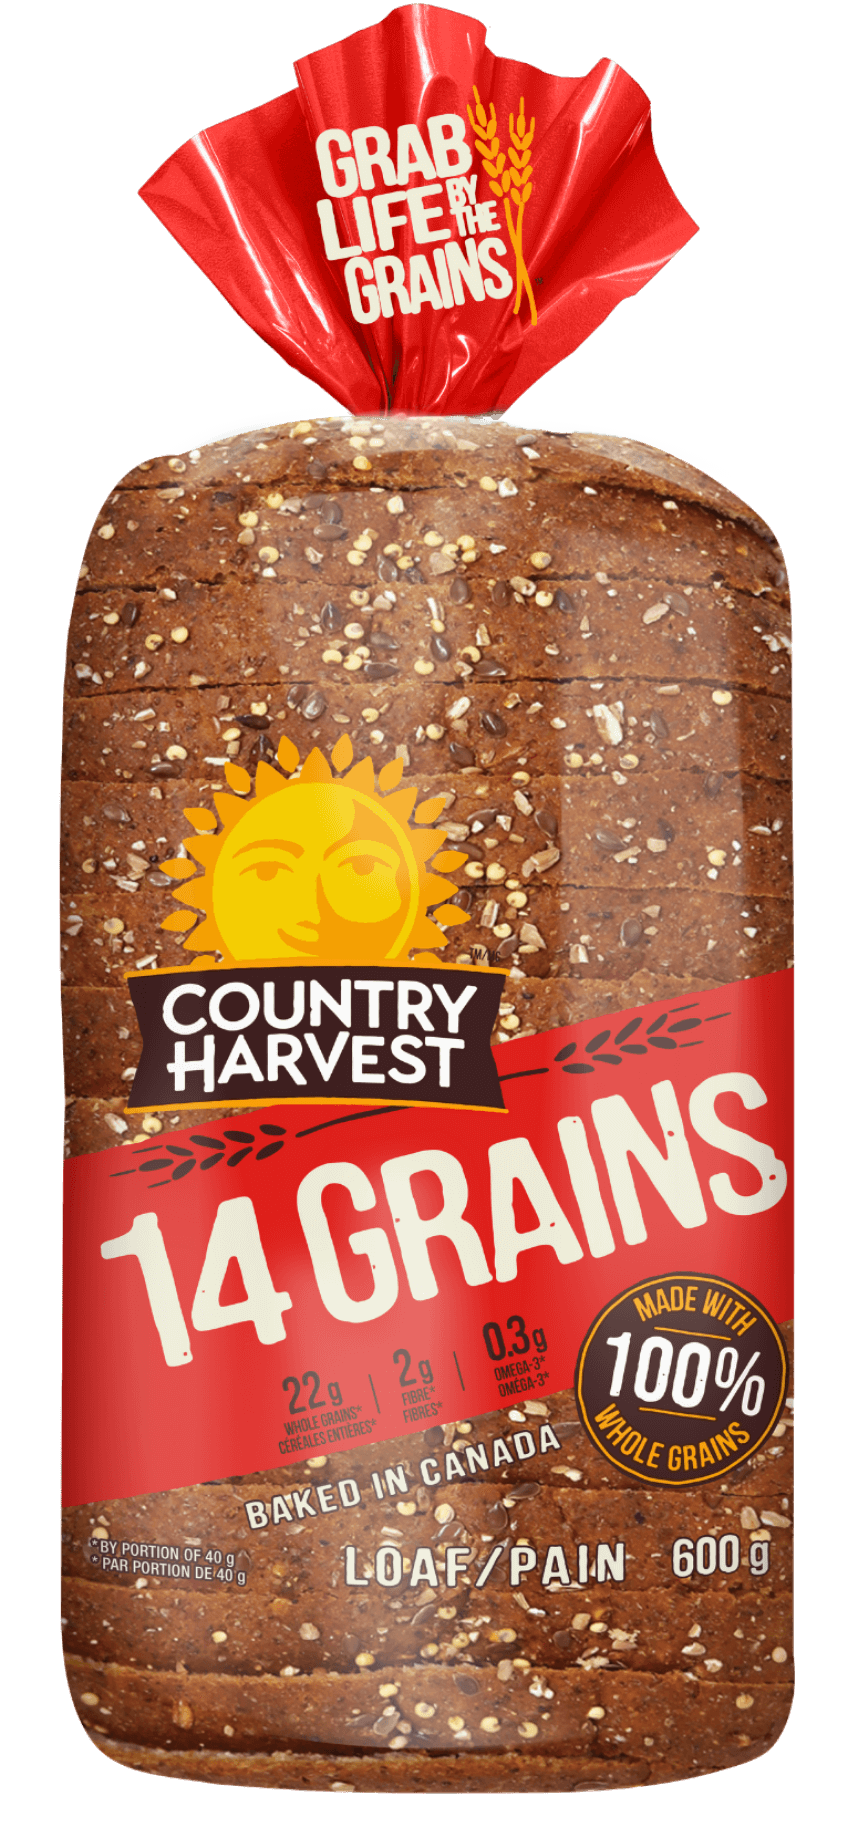 country-harvest-14-grains-bread